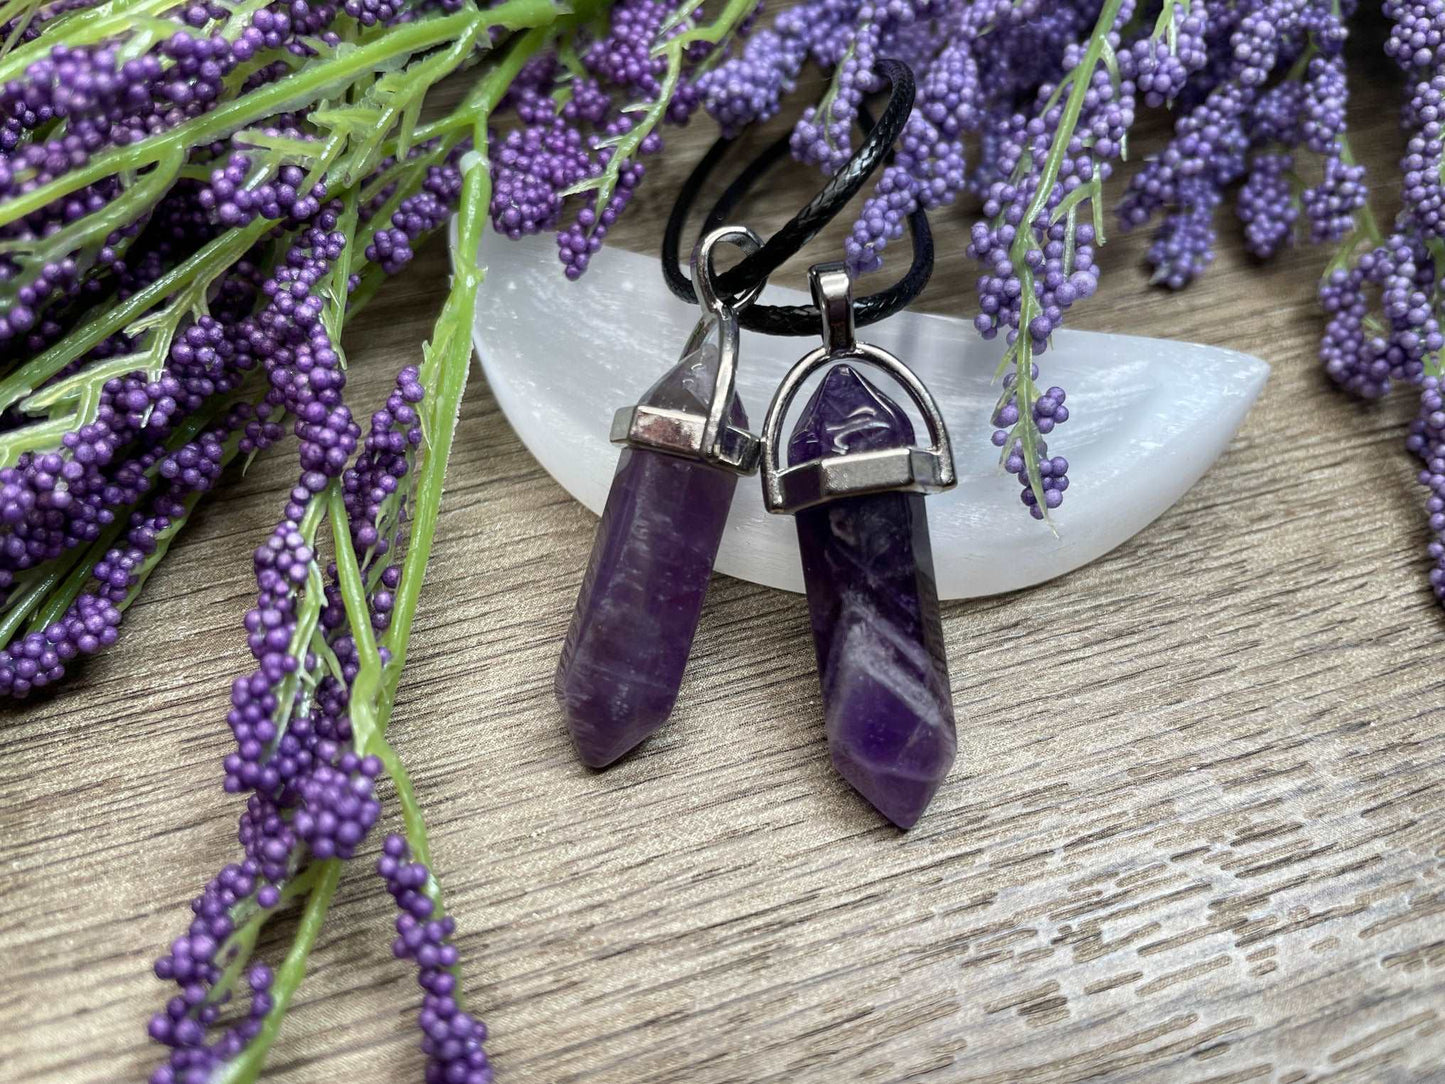 An image of purple amethyst double-terminated polished crystal necklaces sitting on selenite and surrounded by lavender on a wood surface..